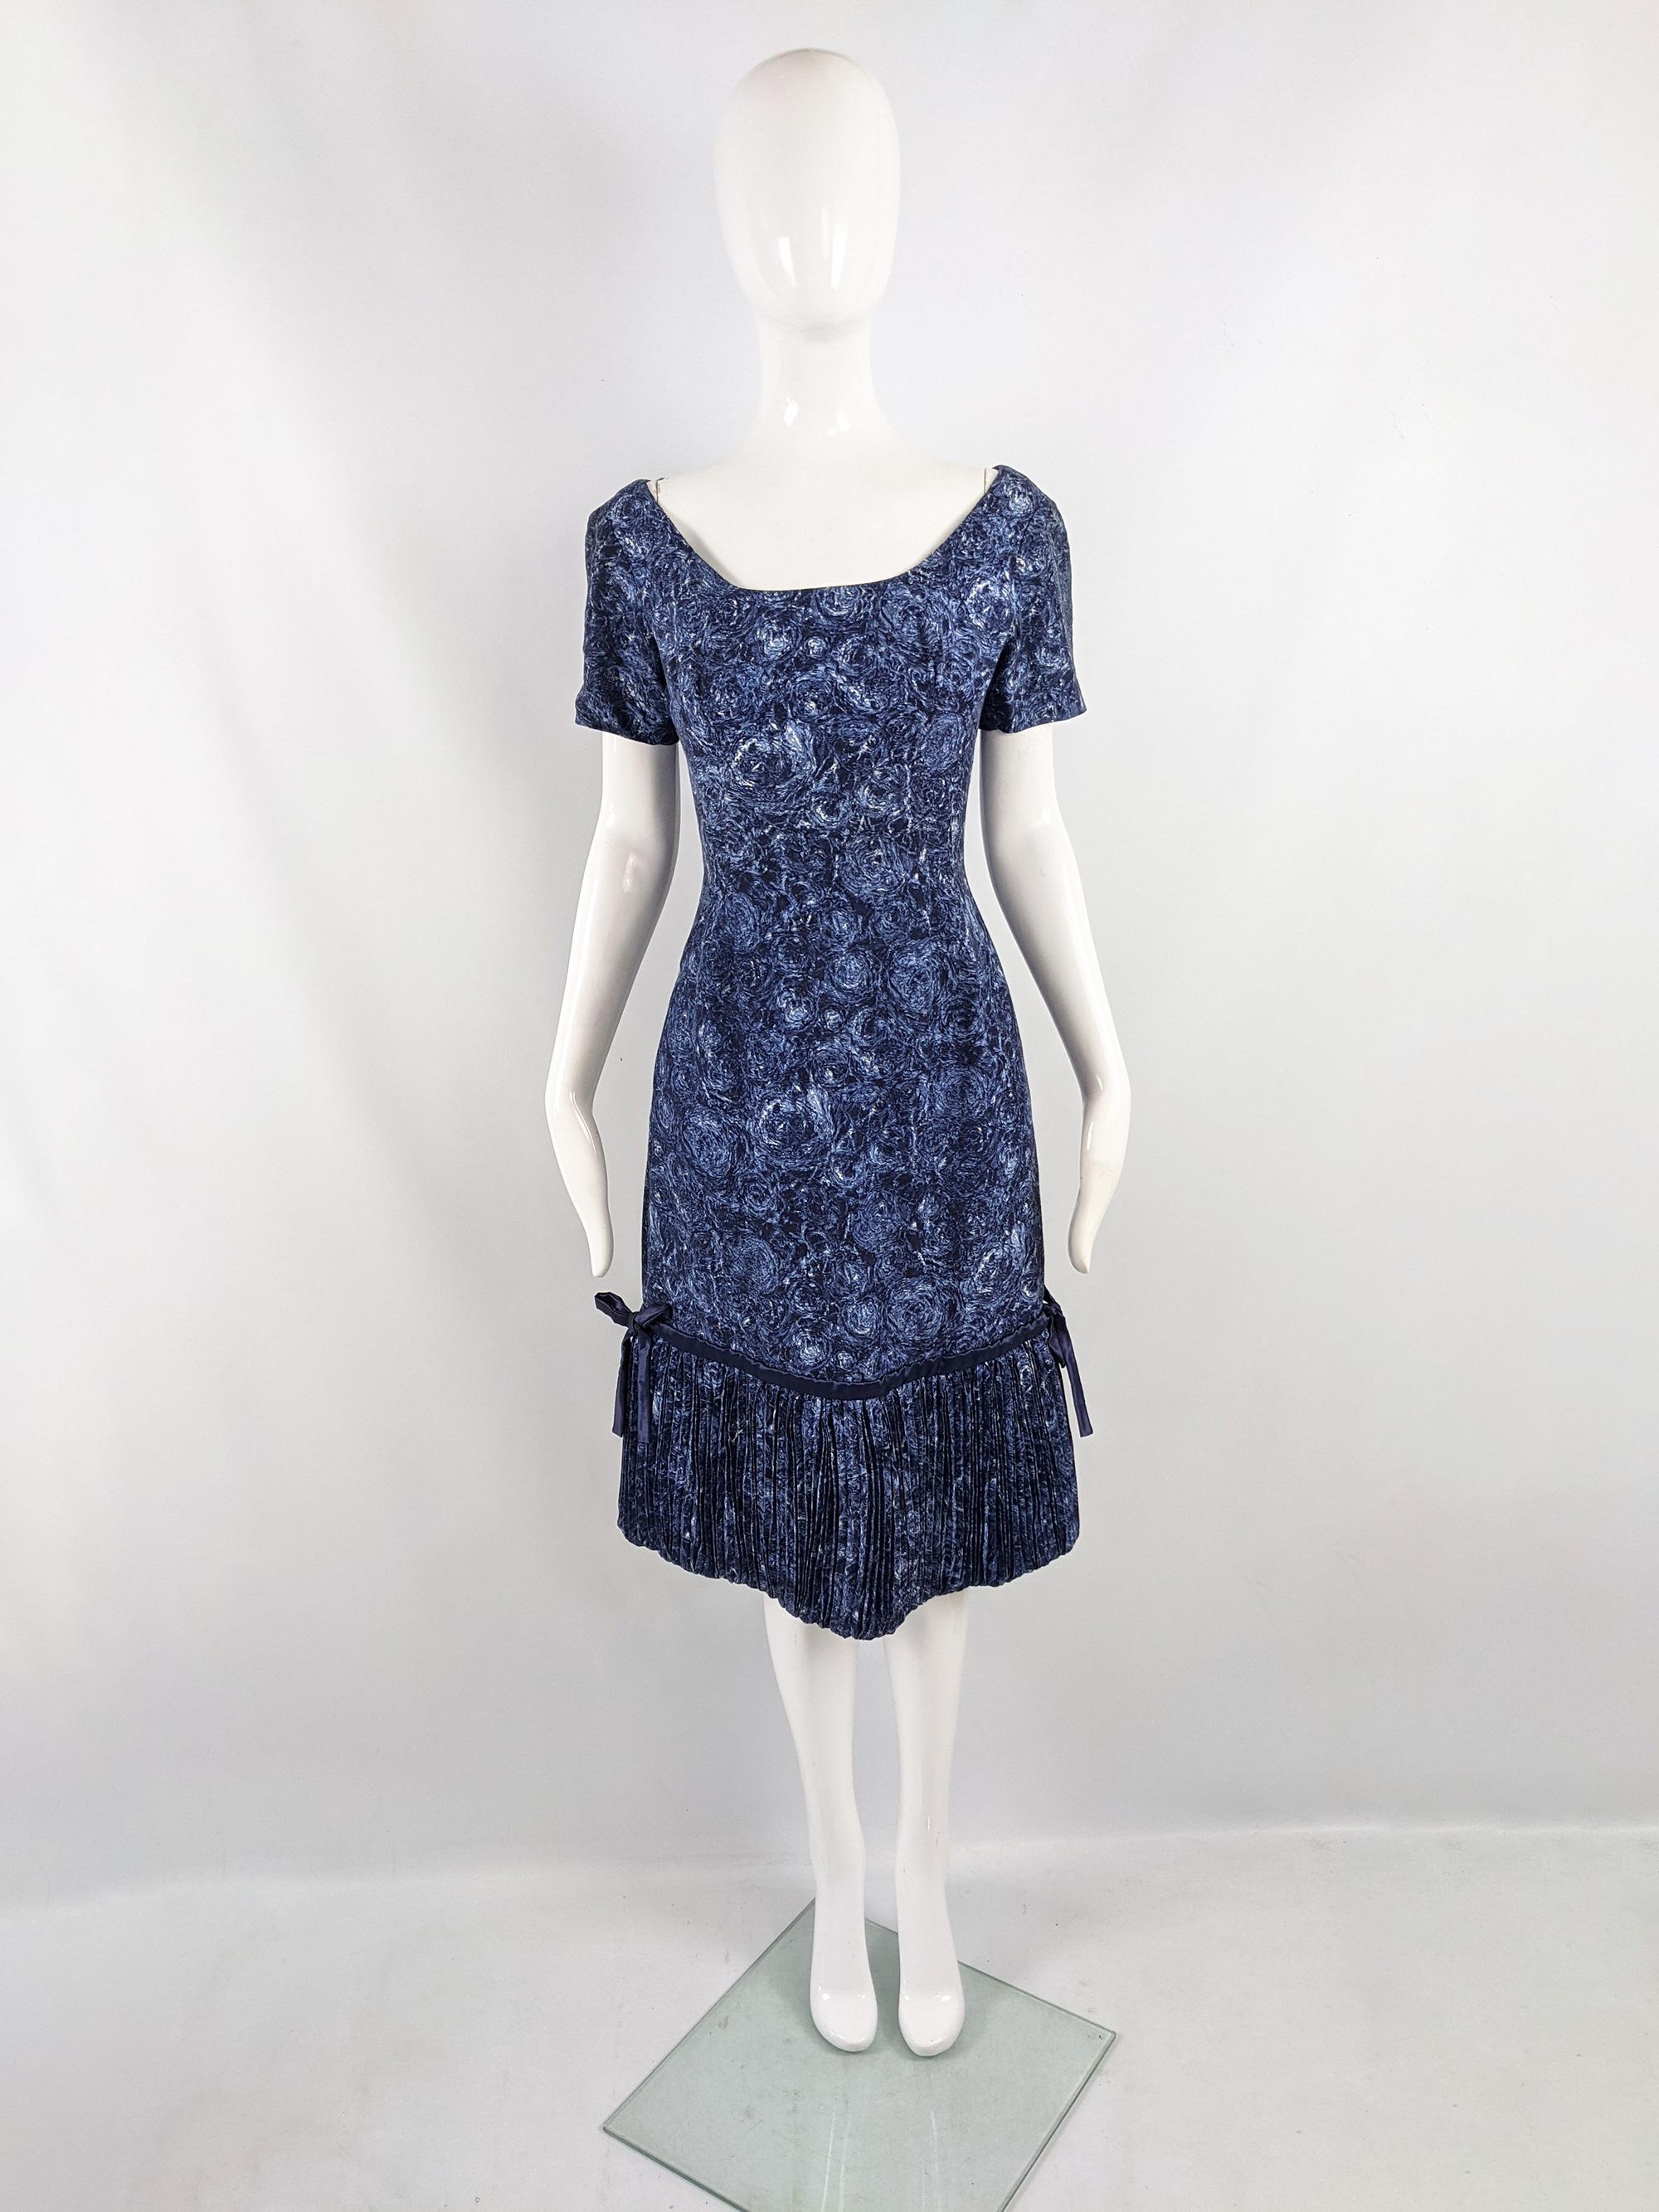 A glamorous vintage womens dress from the 50s by Italian designer, Daisy de Formari of Rome. In a lightweight blue wool fabric with an impressionist floral print throughout, short sleeves and a pleated bubble hem. 

Size: Unlabelled; measures